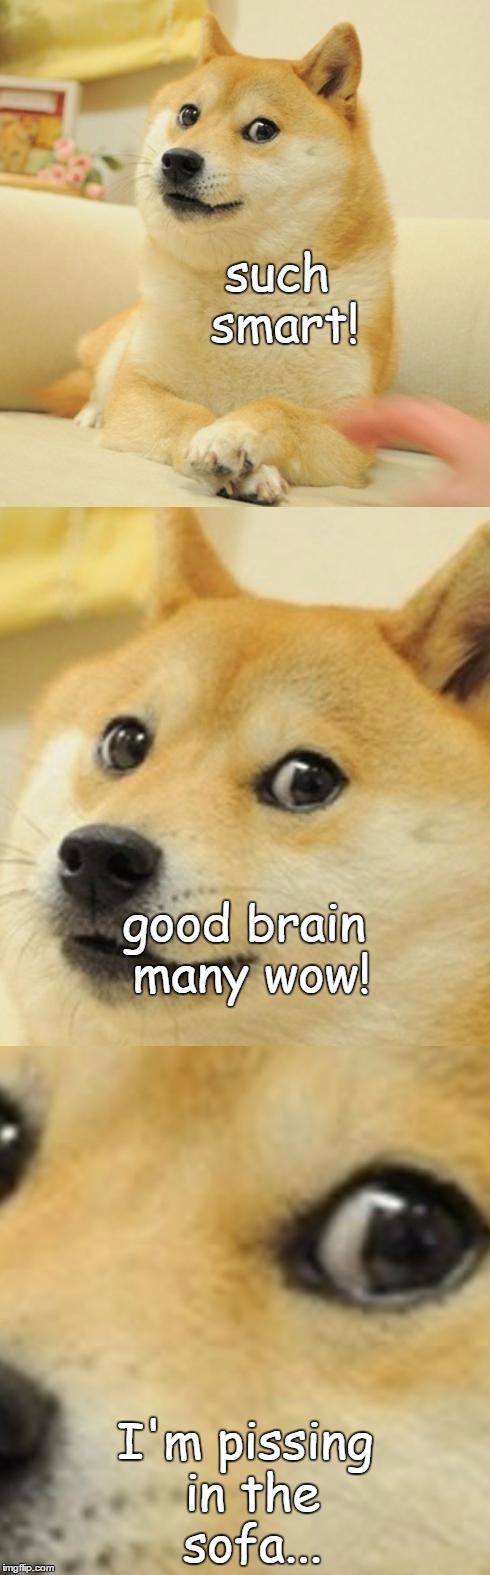 Doge Game |  such smart! good brain many wow! I'm pissing in the sofa... | image tagged in doge game | made w/ Imgflip meme maker